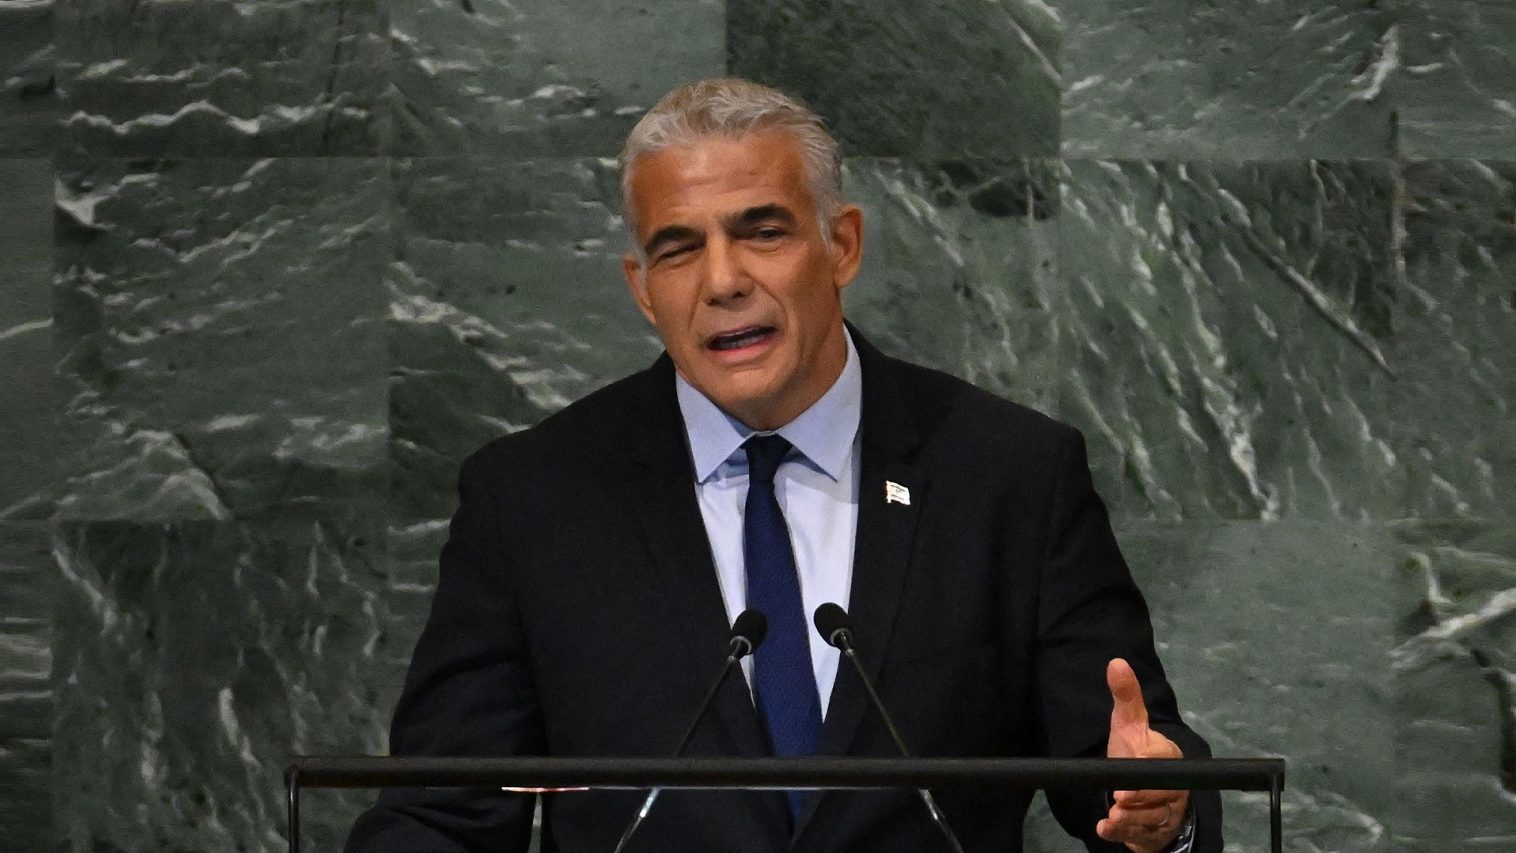 Analysts Weigh In on Lapid’s ‘Refreshing’ and ‘Strong’ UN Speech